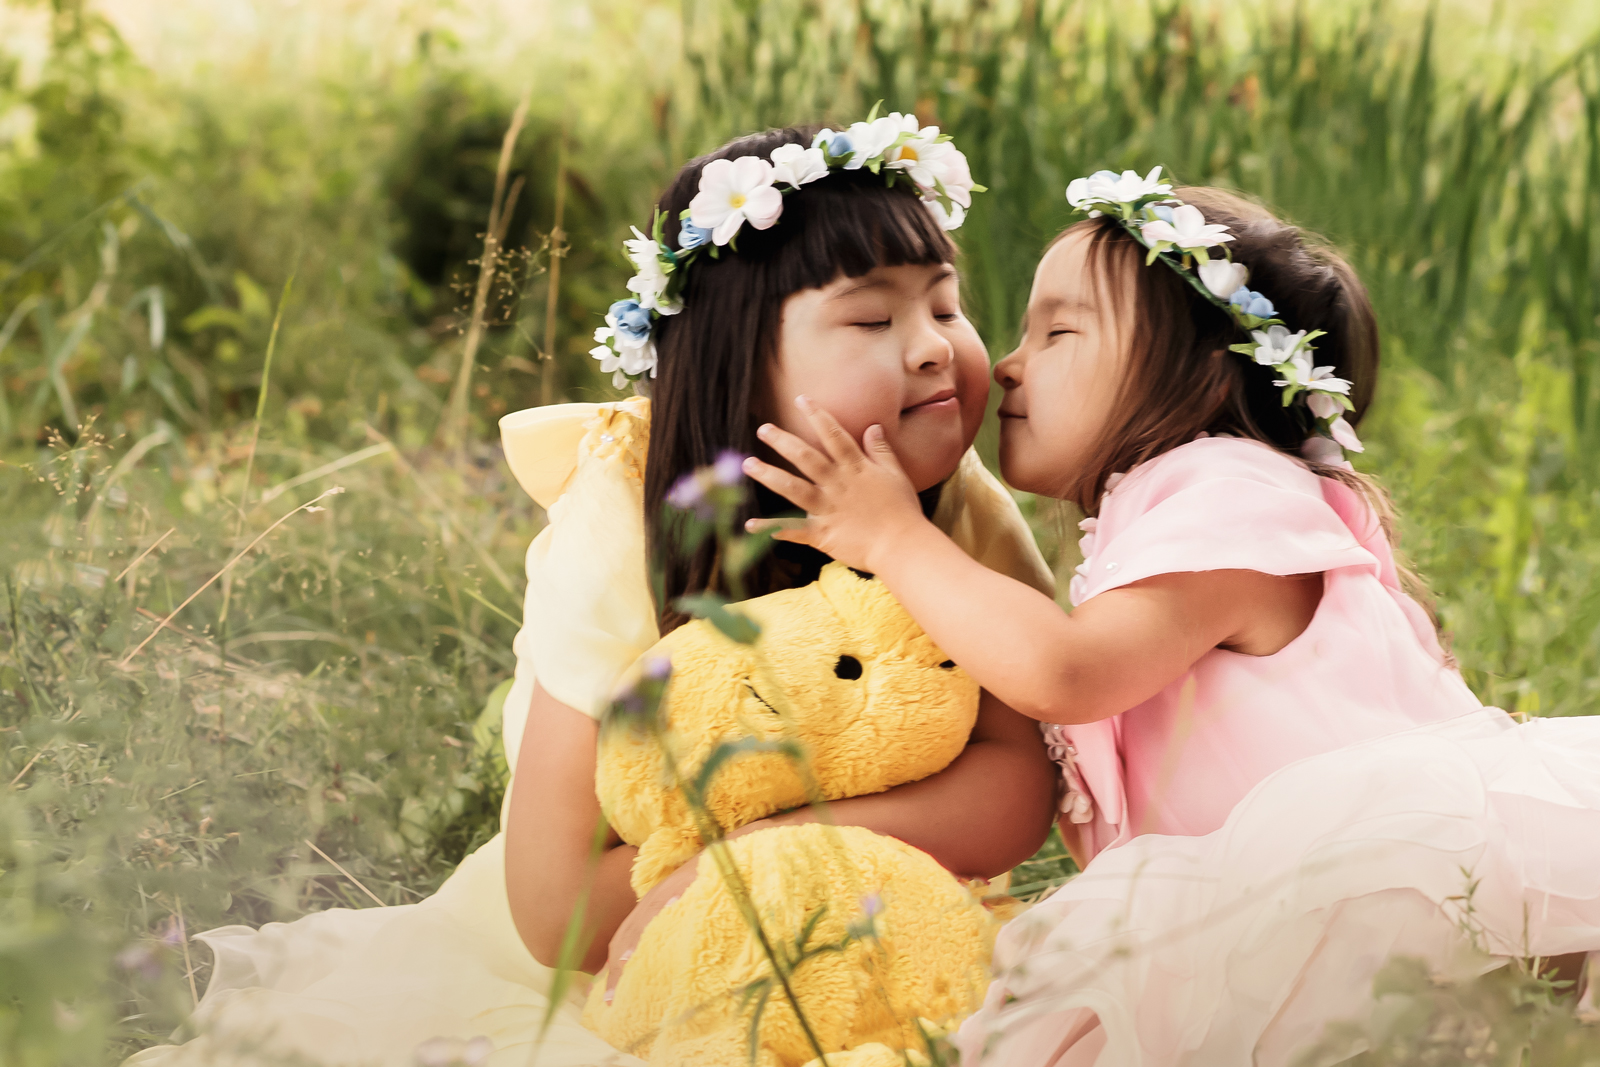 Portrait of two loving sisters wearing princess dresses sitting on a field holding a toy bear.